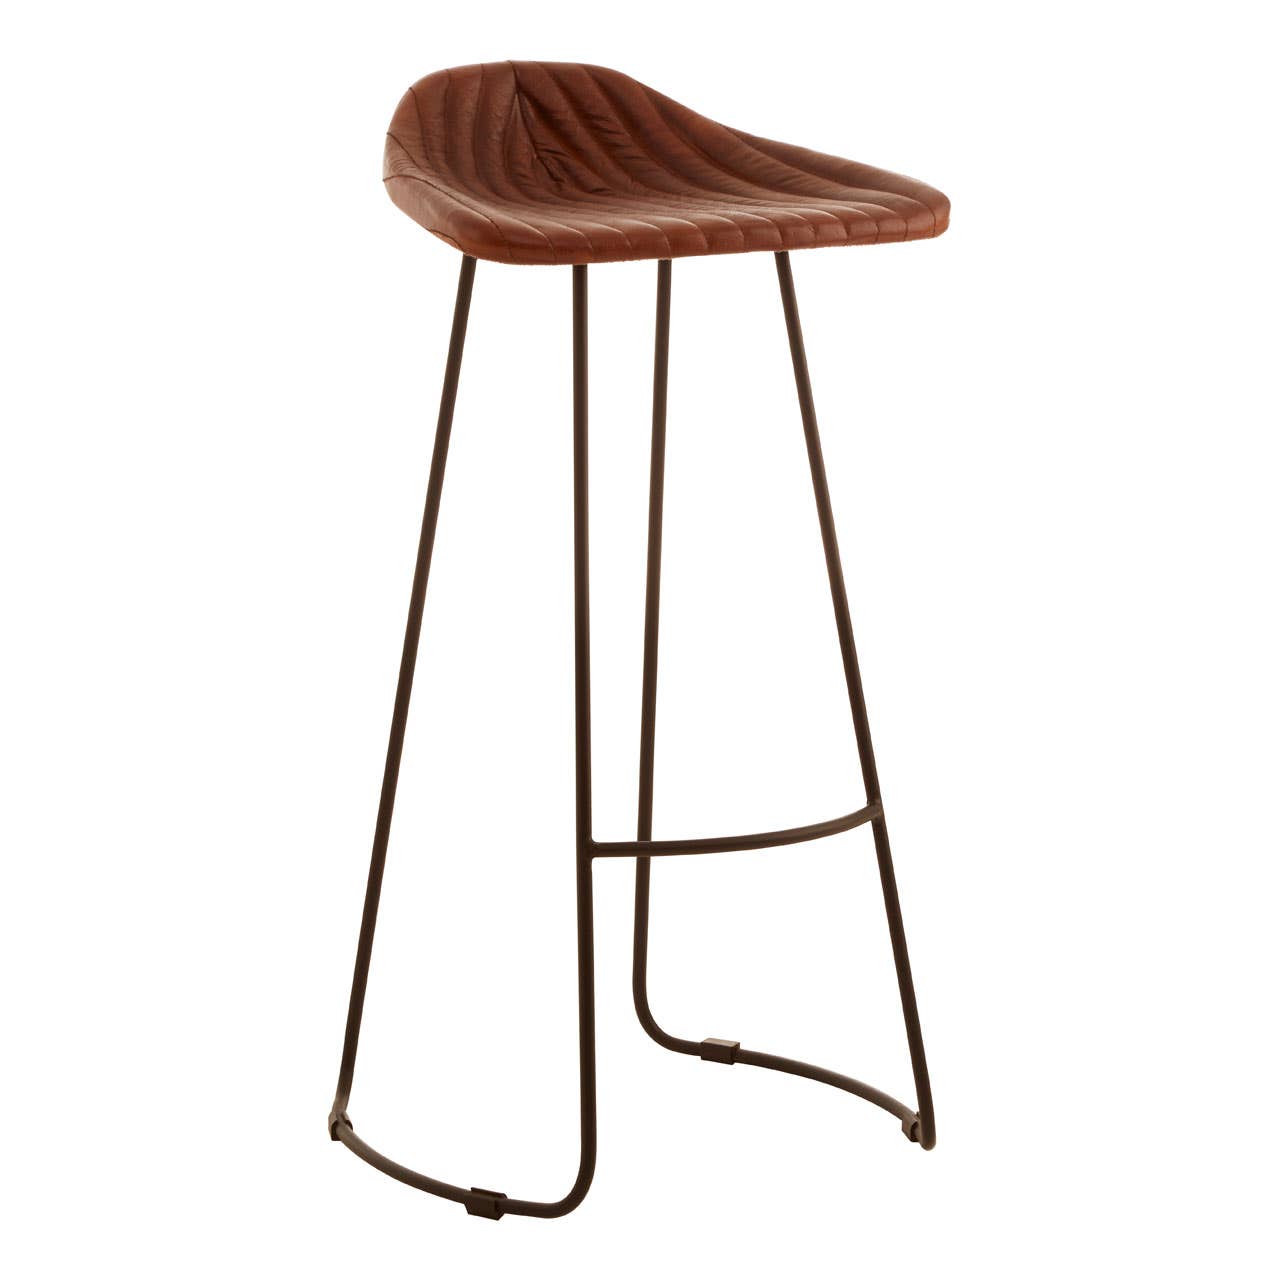 Park Lane Biscuit Tan Buffalo Leather Bar & Kitchen Stool With Iron Legs & Footrest